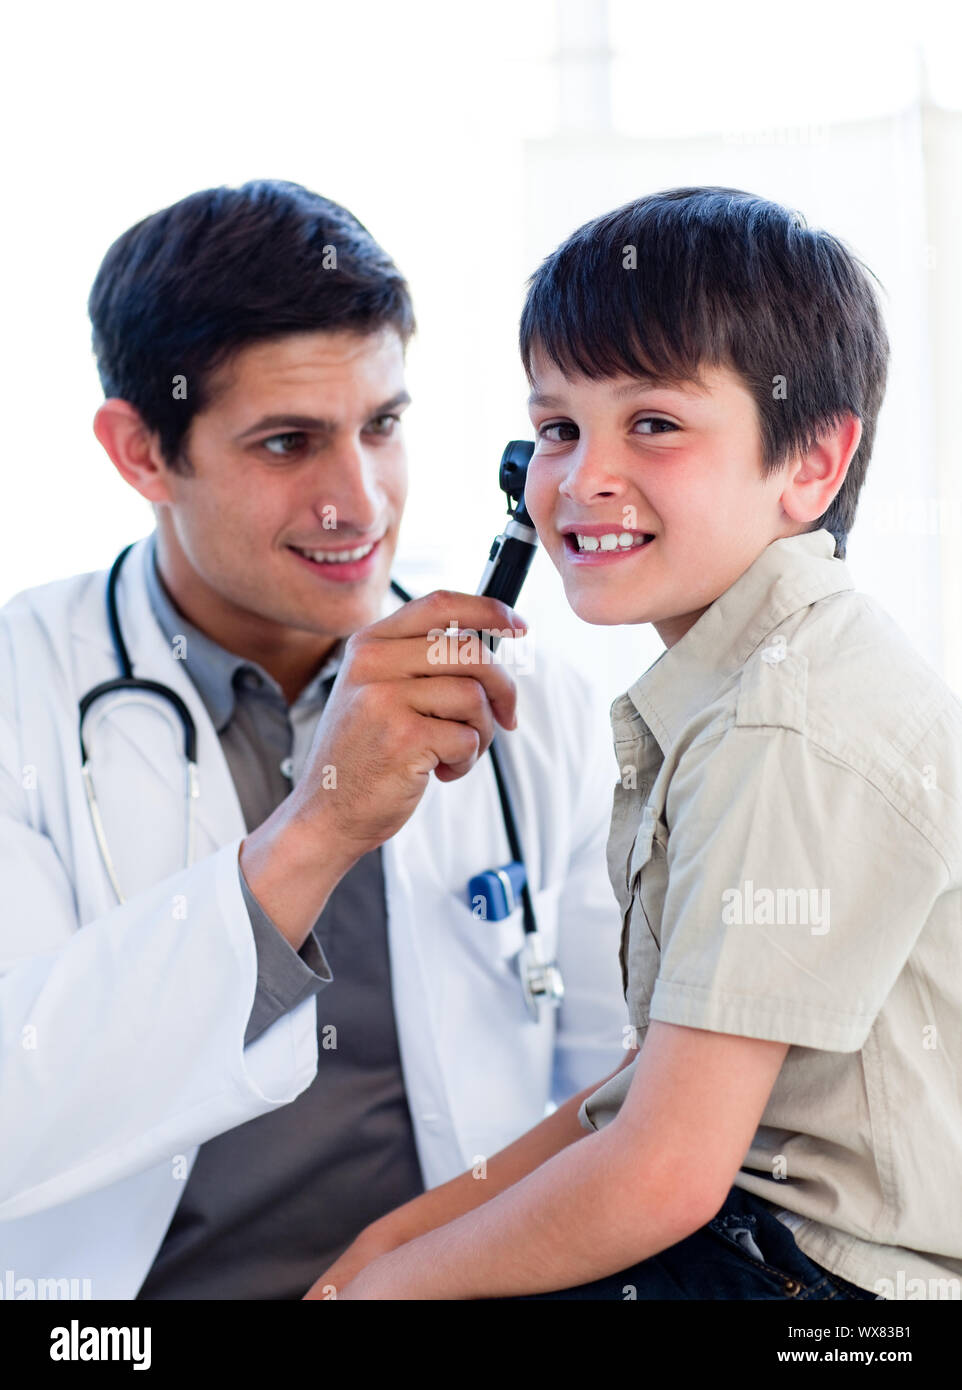 Charming doctor examining little boy's ears at the practice Stock Photo